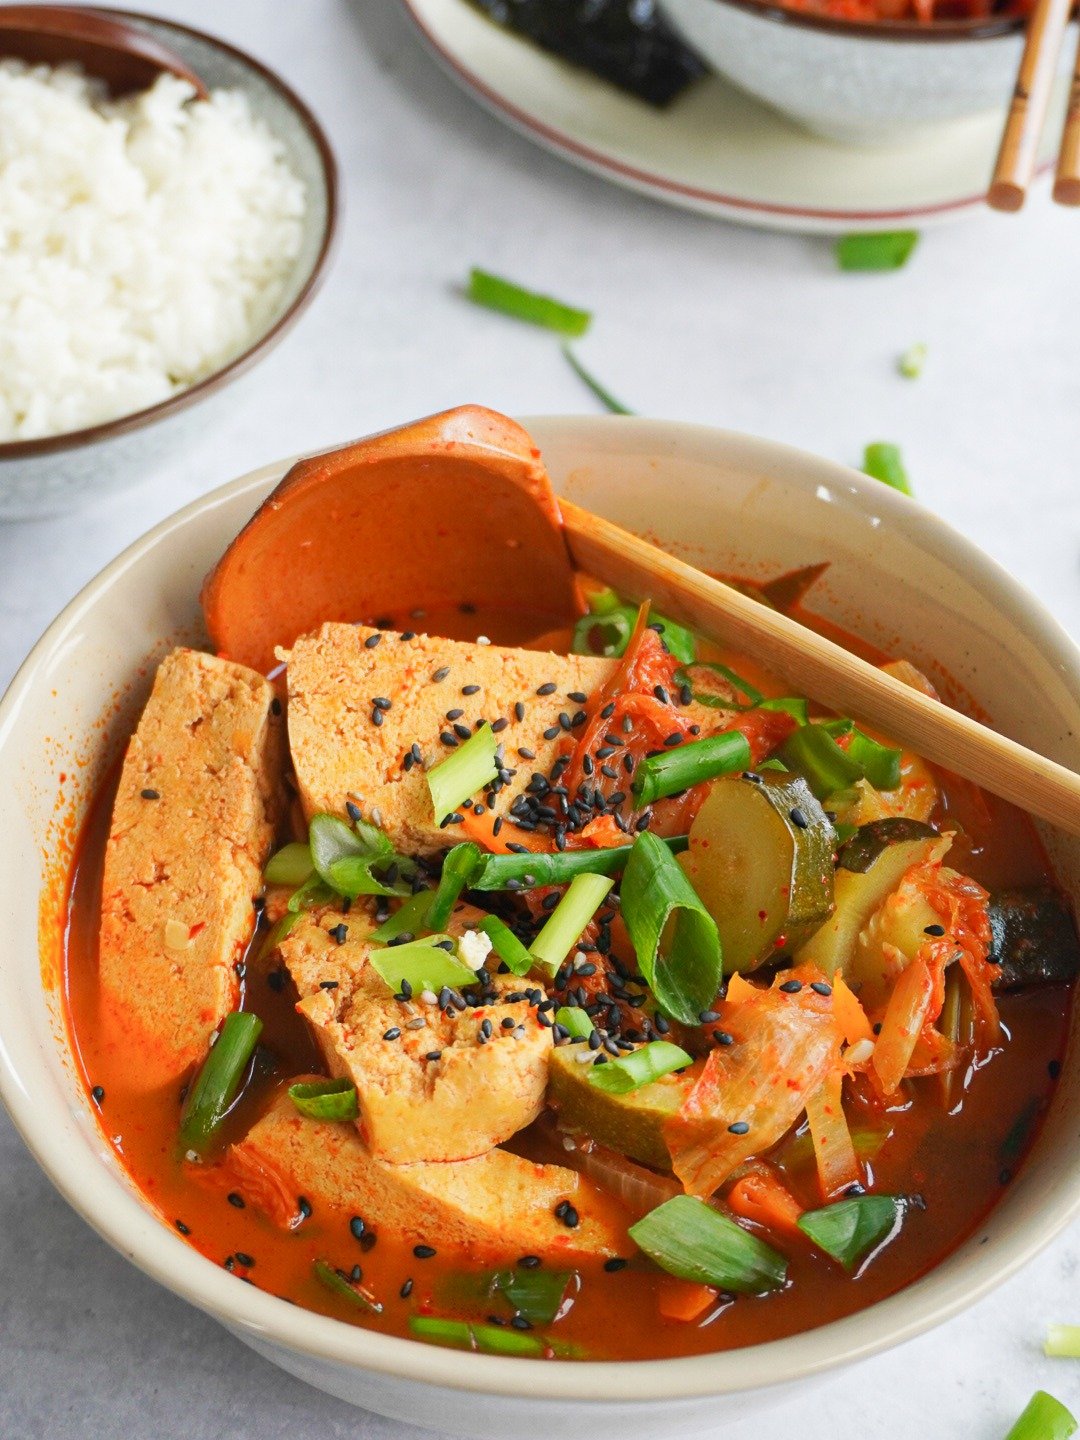 Prepared with soul-comforting ingredients such as kimchi, tofu, vegetables, and burning spices including ginger and hot pepper, this stew ticks many boxes during the cold season, as well as being vegan friendly.  